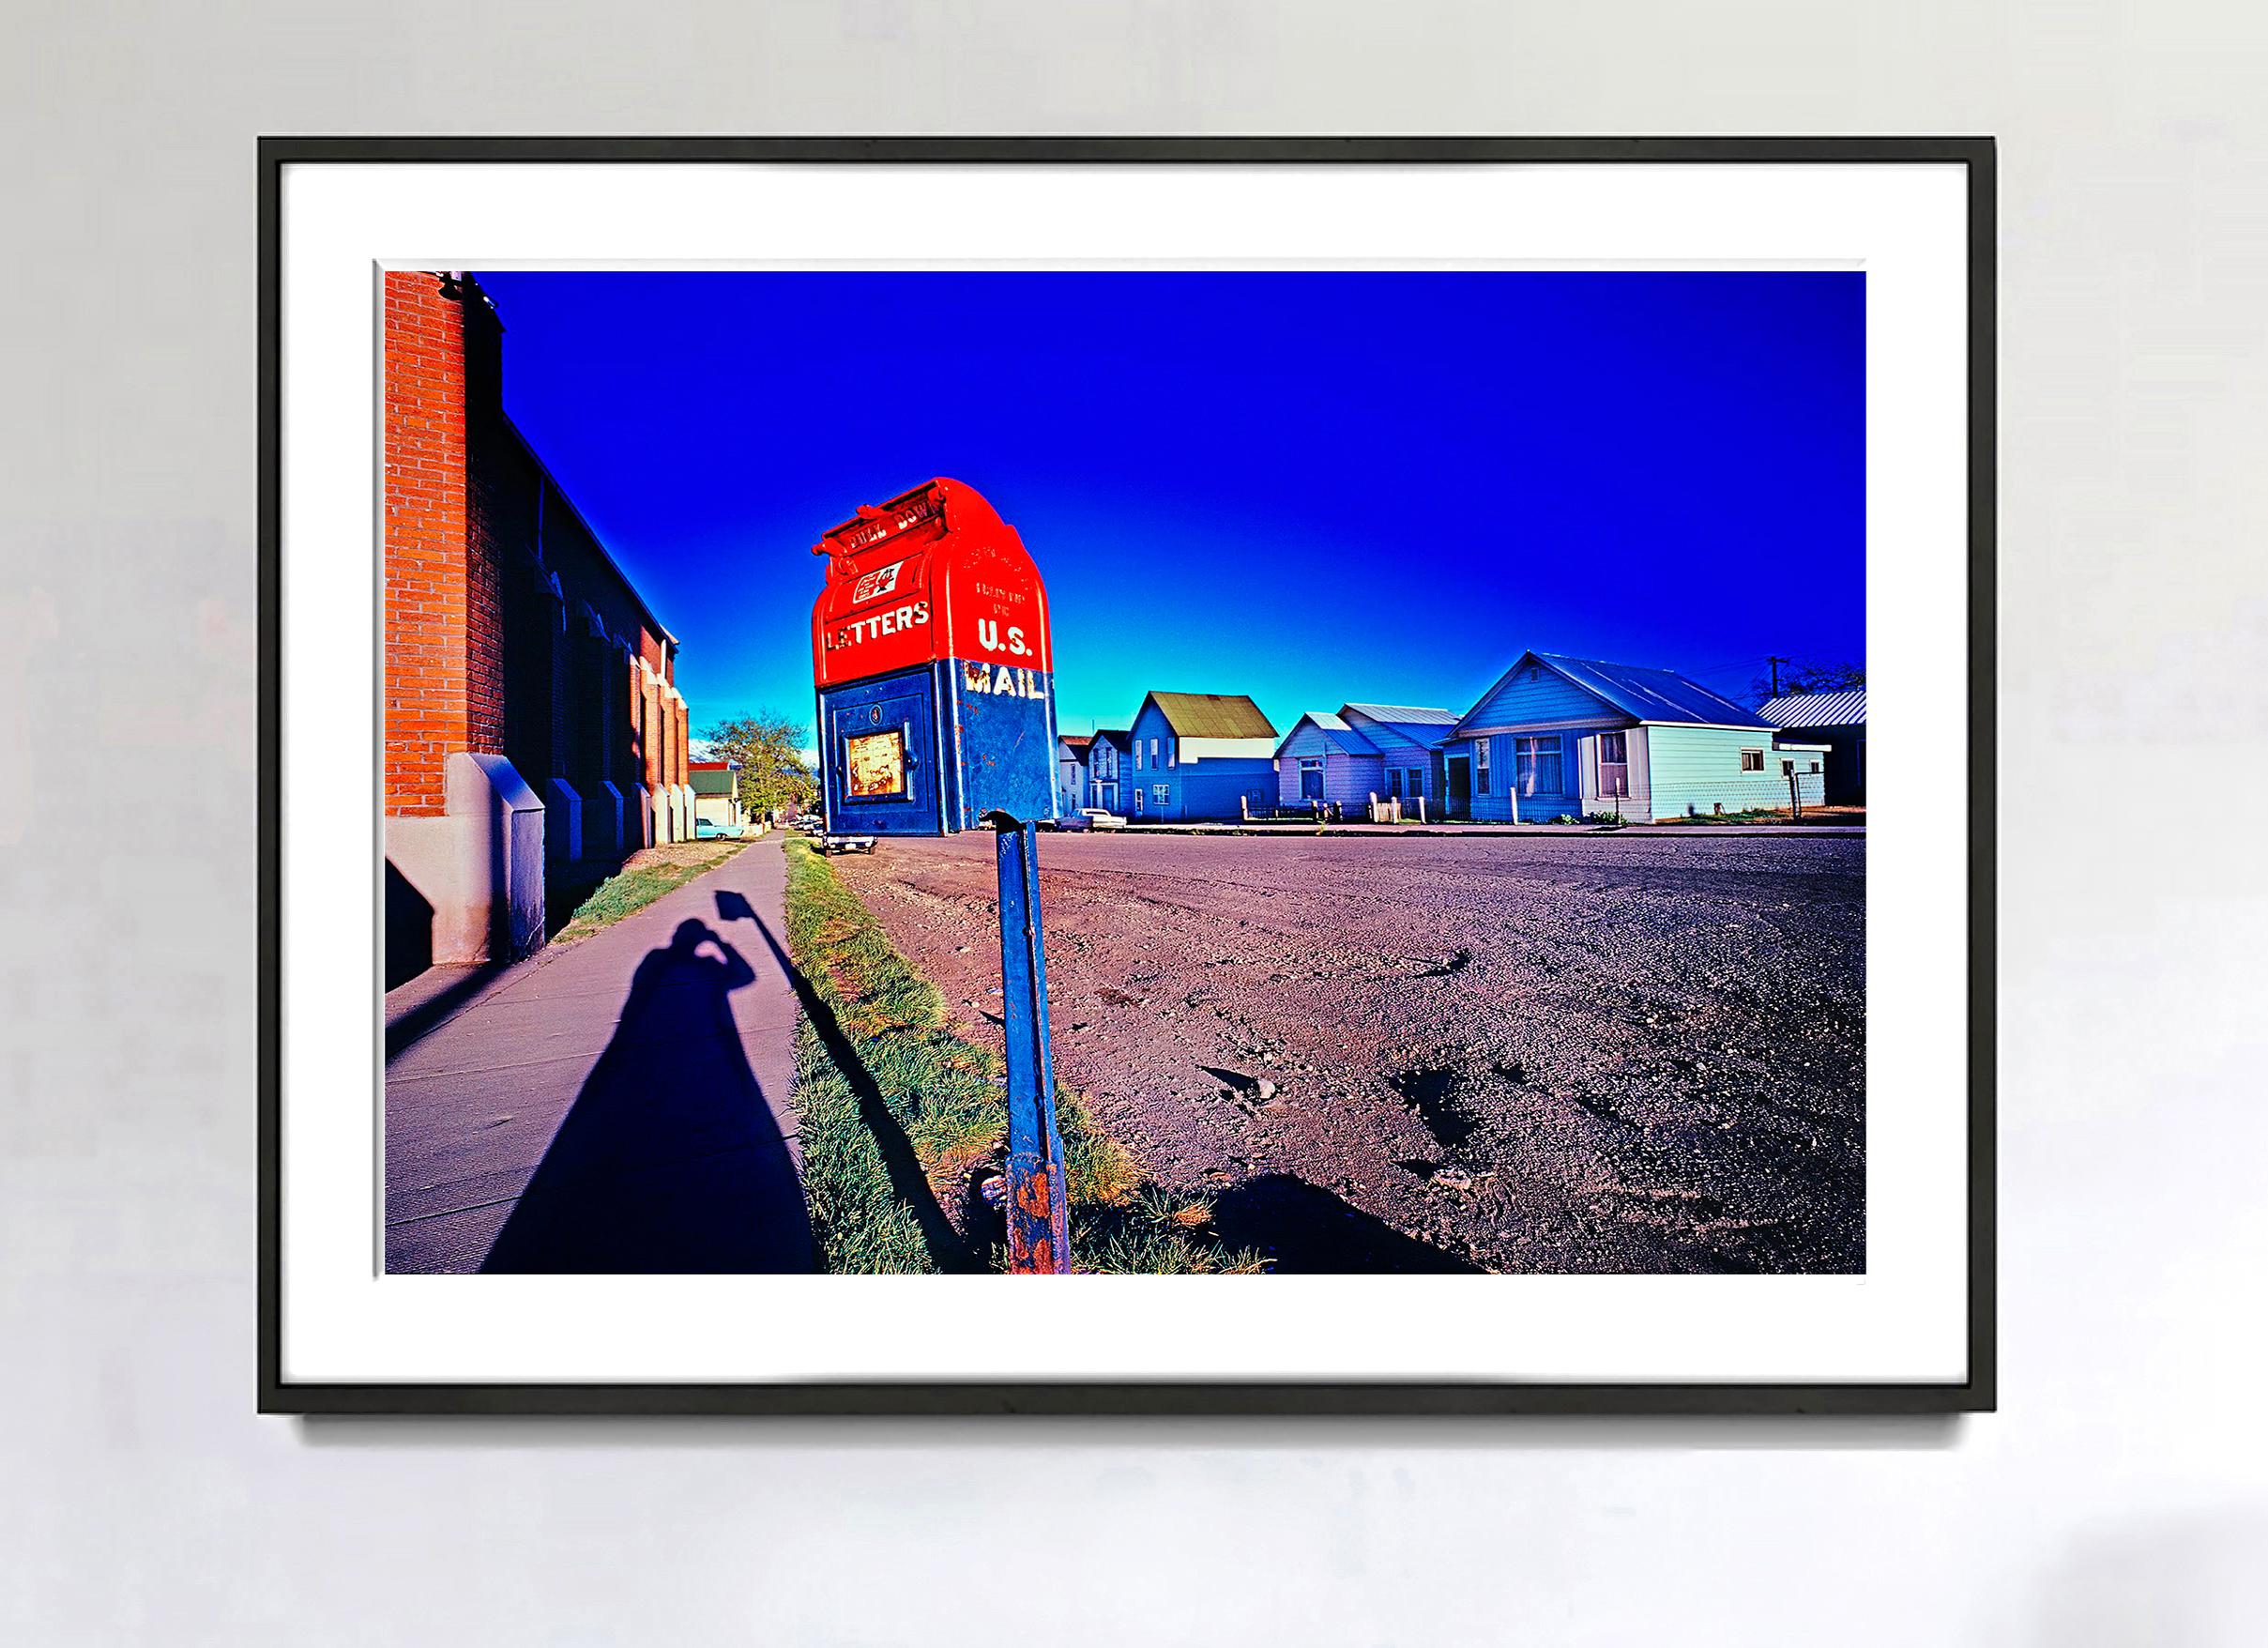 Saturated Blue Sky Small Town, Early Color Photography  For Sale 1